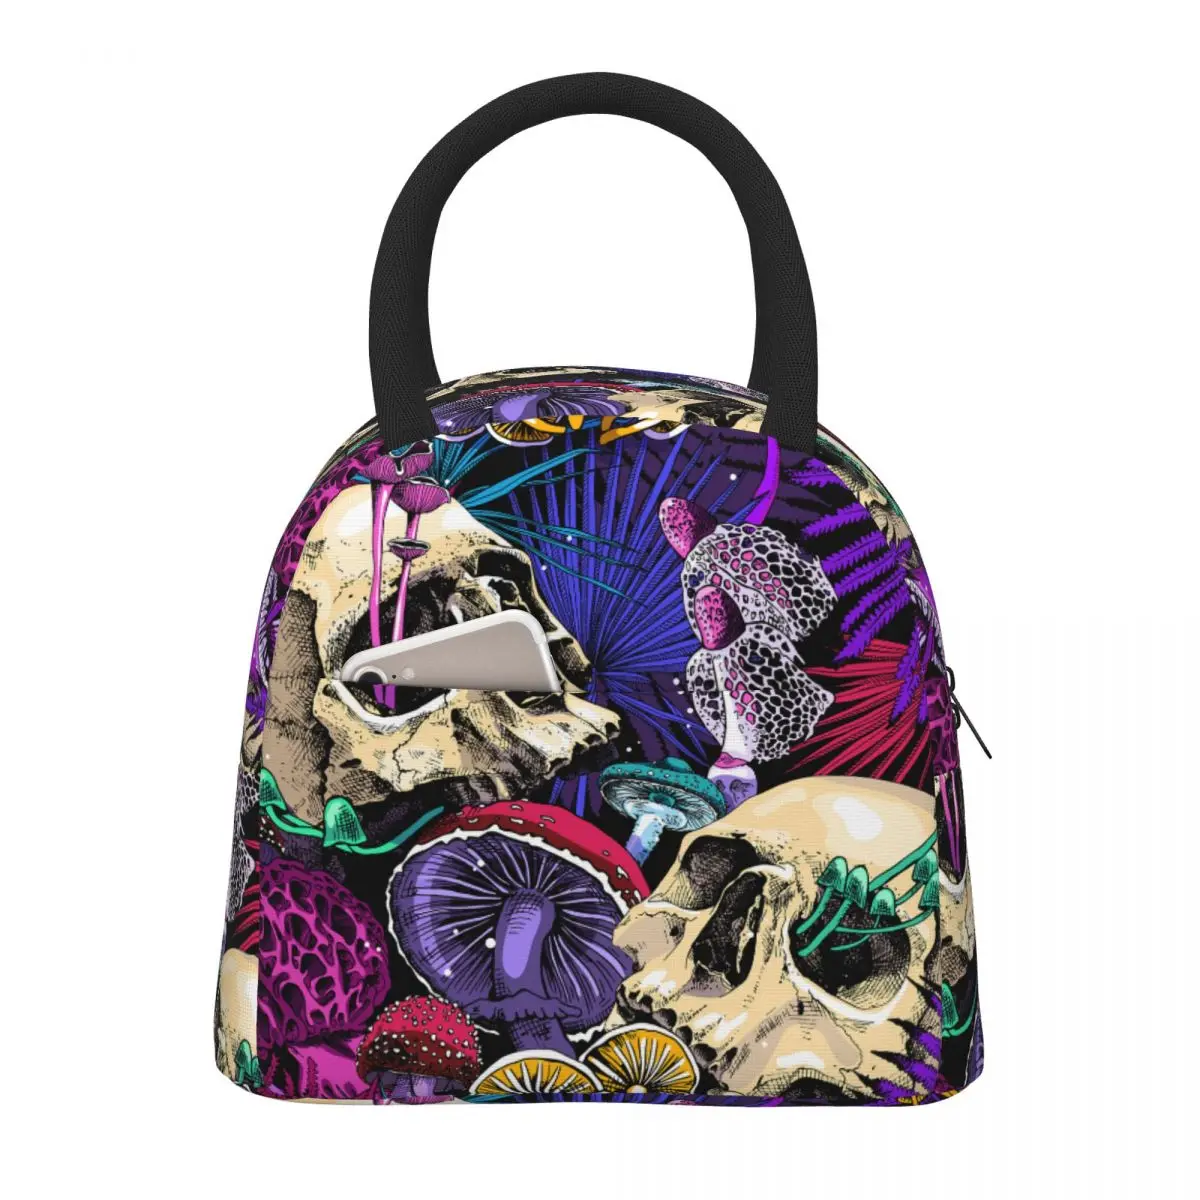 Psychedelic Mushrooms And Skulls Lunch Bag Waterproof Insulated Cooler Thermal Food Picnic Travel Lunch Box for Women Children